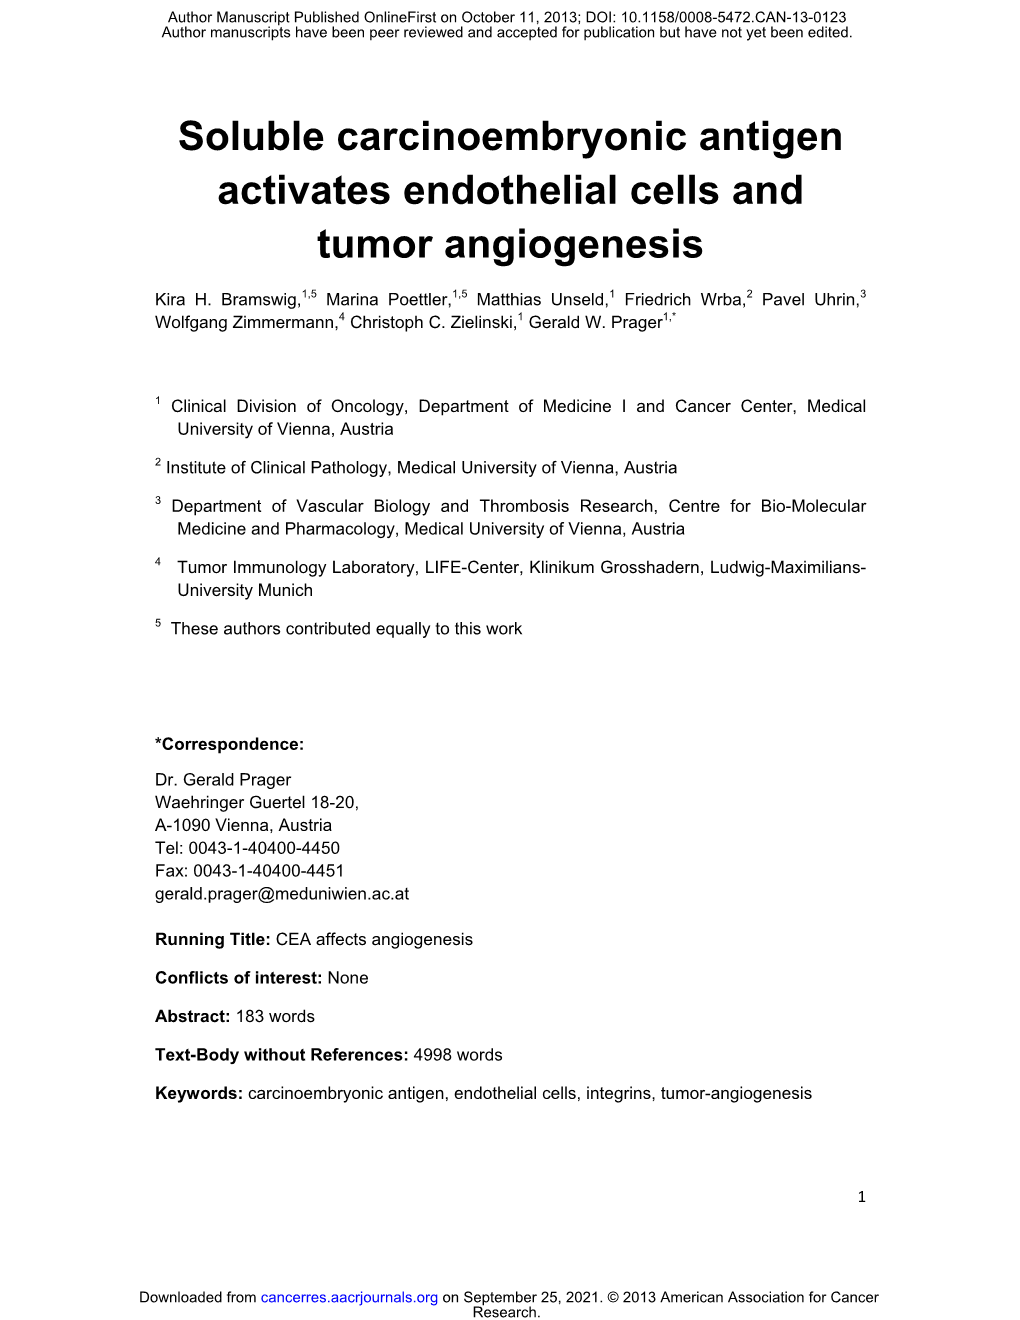 Soluble Carcinoembryonic Antigen Activates Endothelial Cells and Tumor Angiogenesis